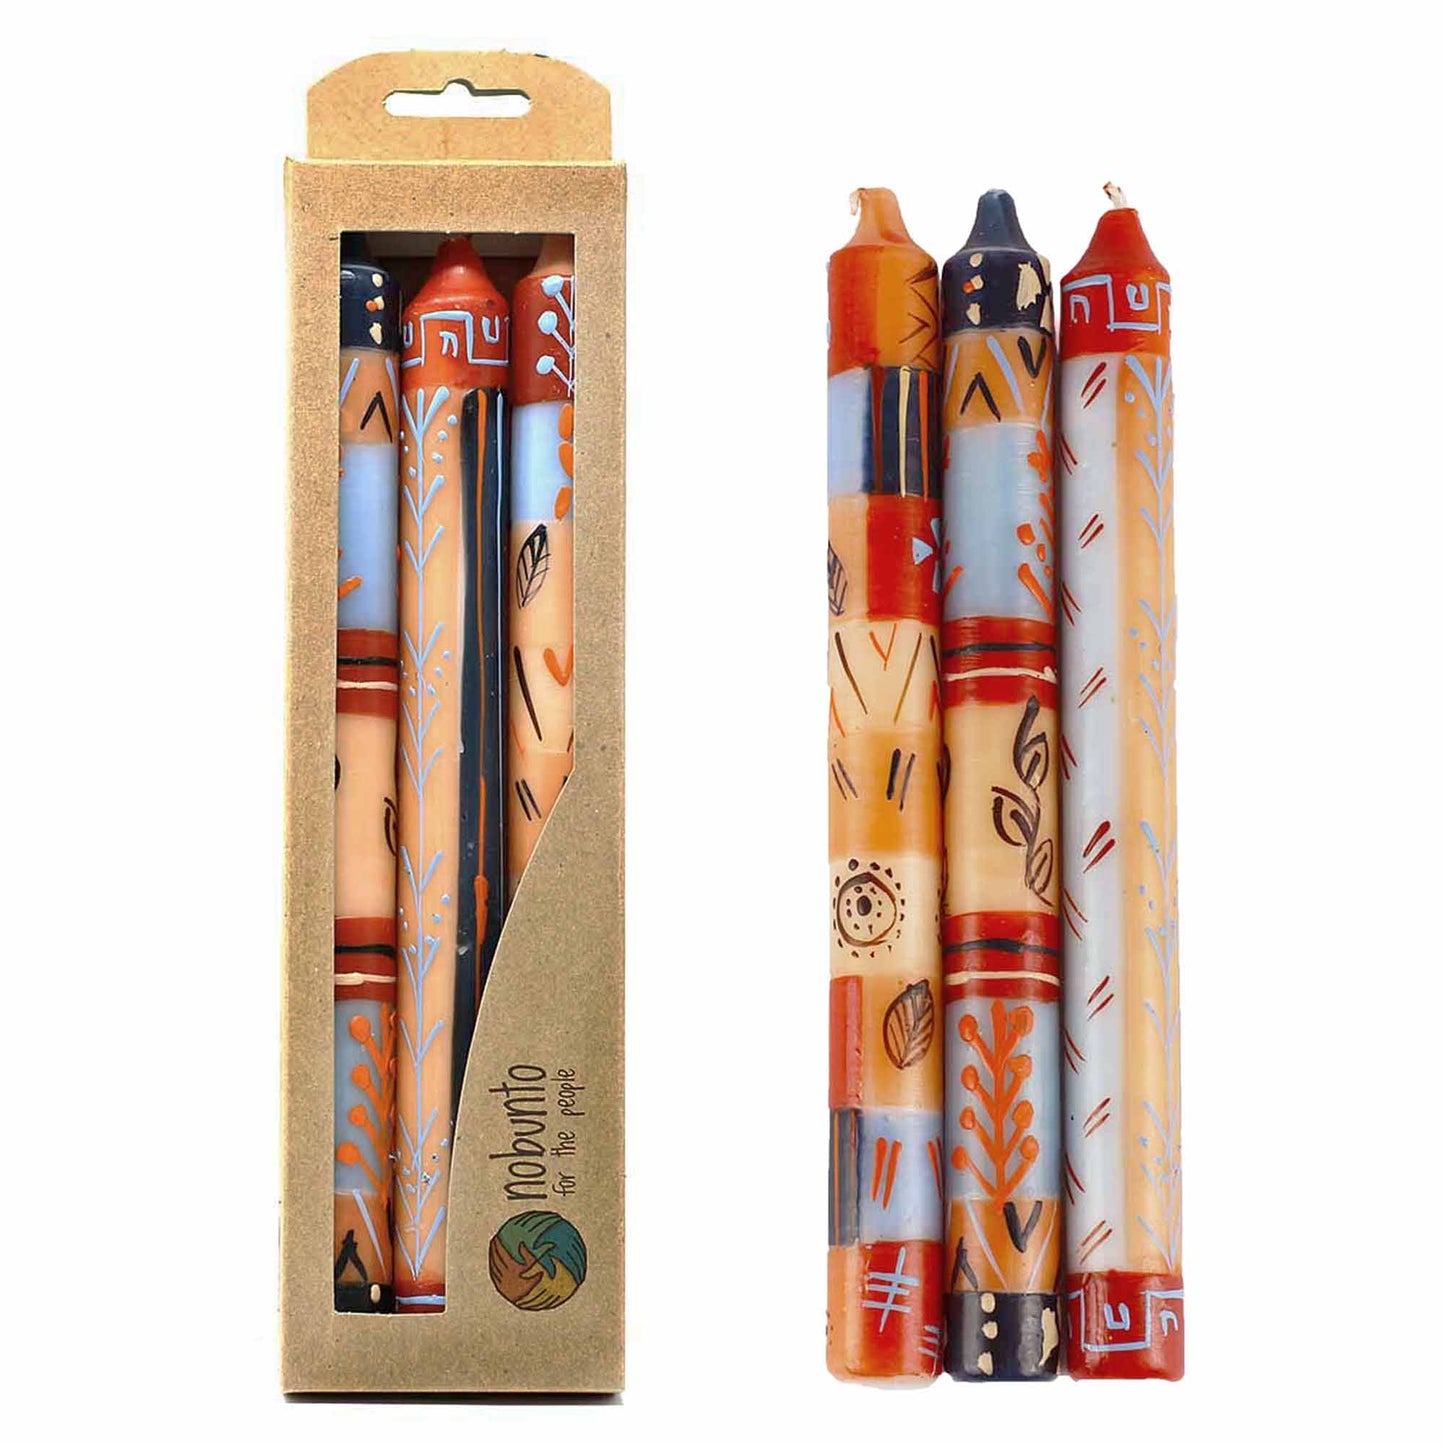 Hand Painted Candles in Uzushi Design (three tapers) - Nobunto - Linda Kay Gifford’s - Those Nasty Women TALK! by SWEETSurvivor